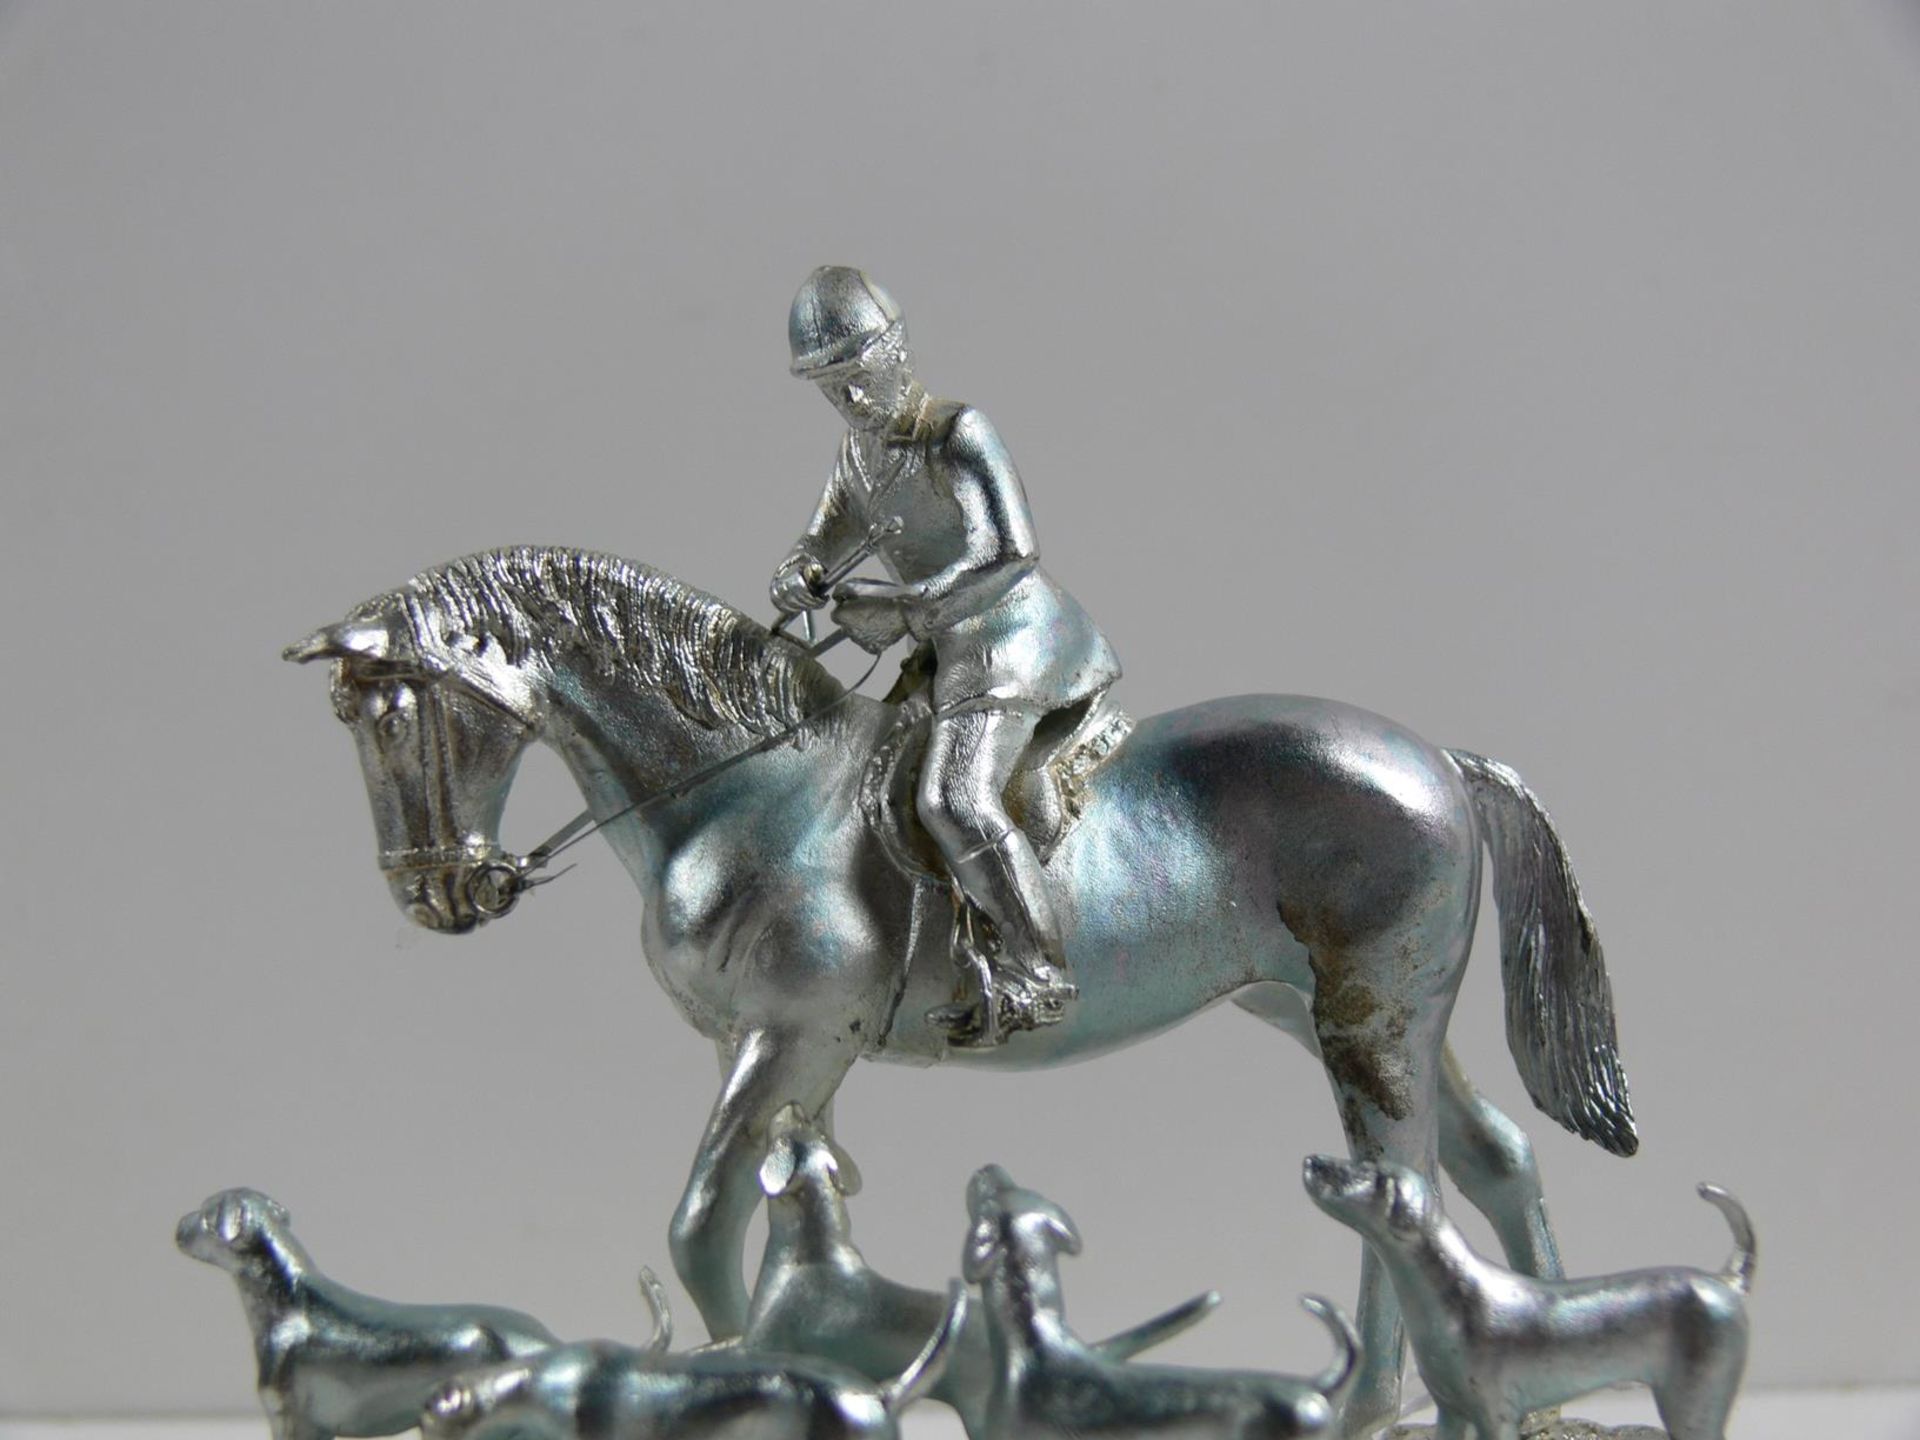 A Silver Model 'Master & Hounds' on Wooden Base (Birmingham - 1979 (?) Ammonite Ltd) (RRP £695.00) - Image 3 of 6